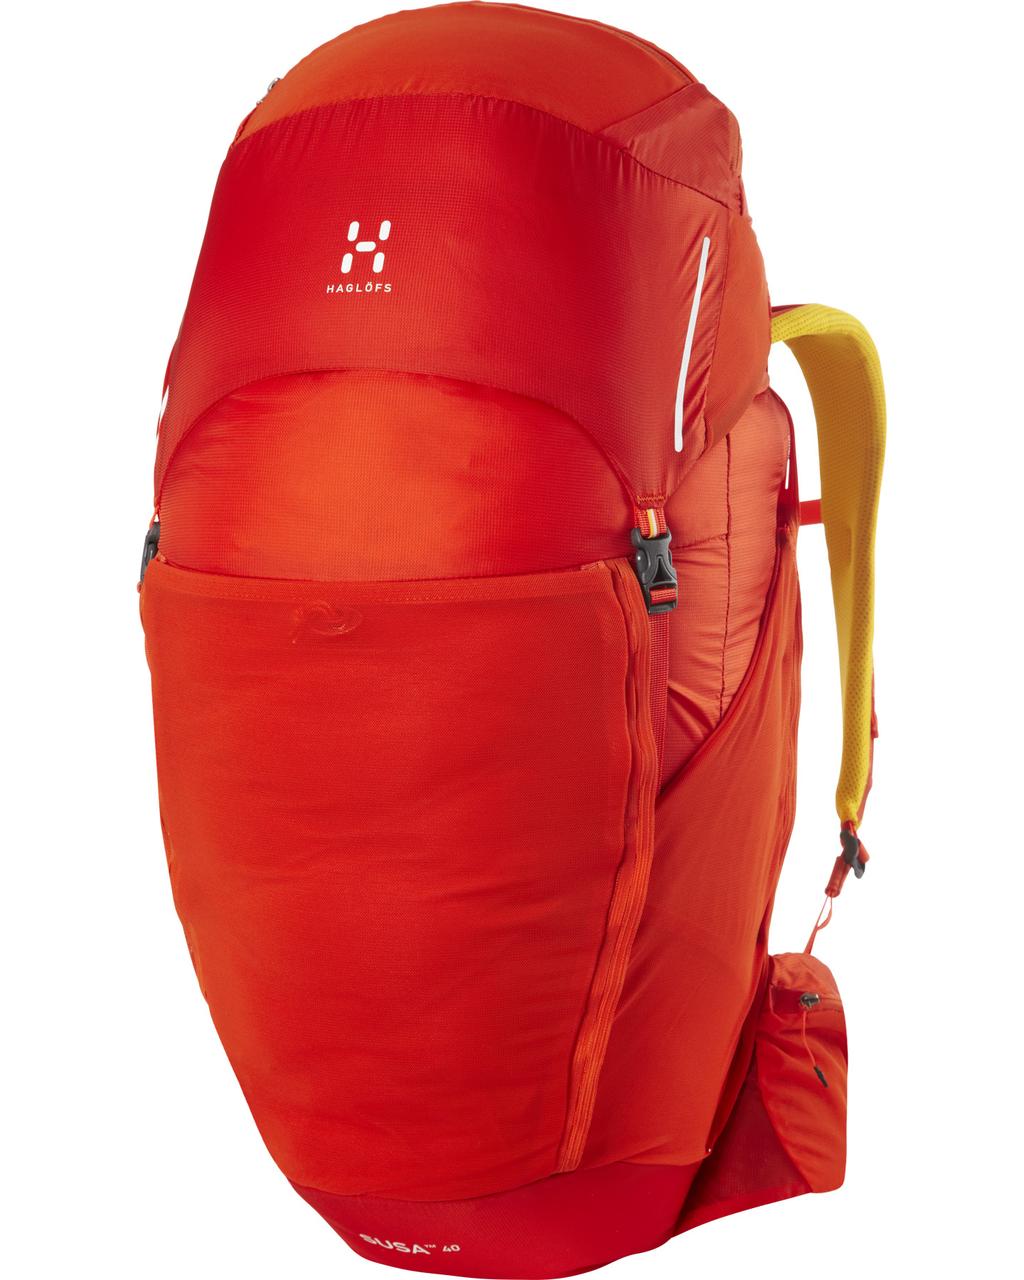 L.I.M SUSA 40 L.I.M Susa 40 is a lightweight trekking pack for fast and light hiking. It features many details that maximize ventilation, accessibility and performance without adding weight.